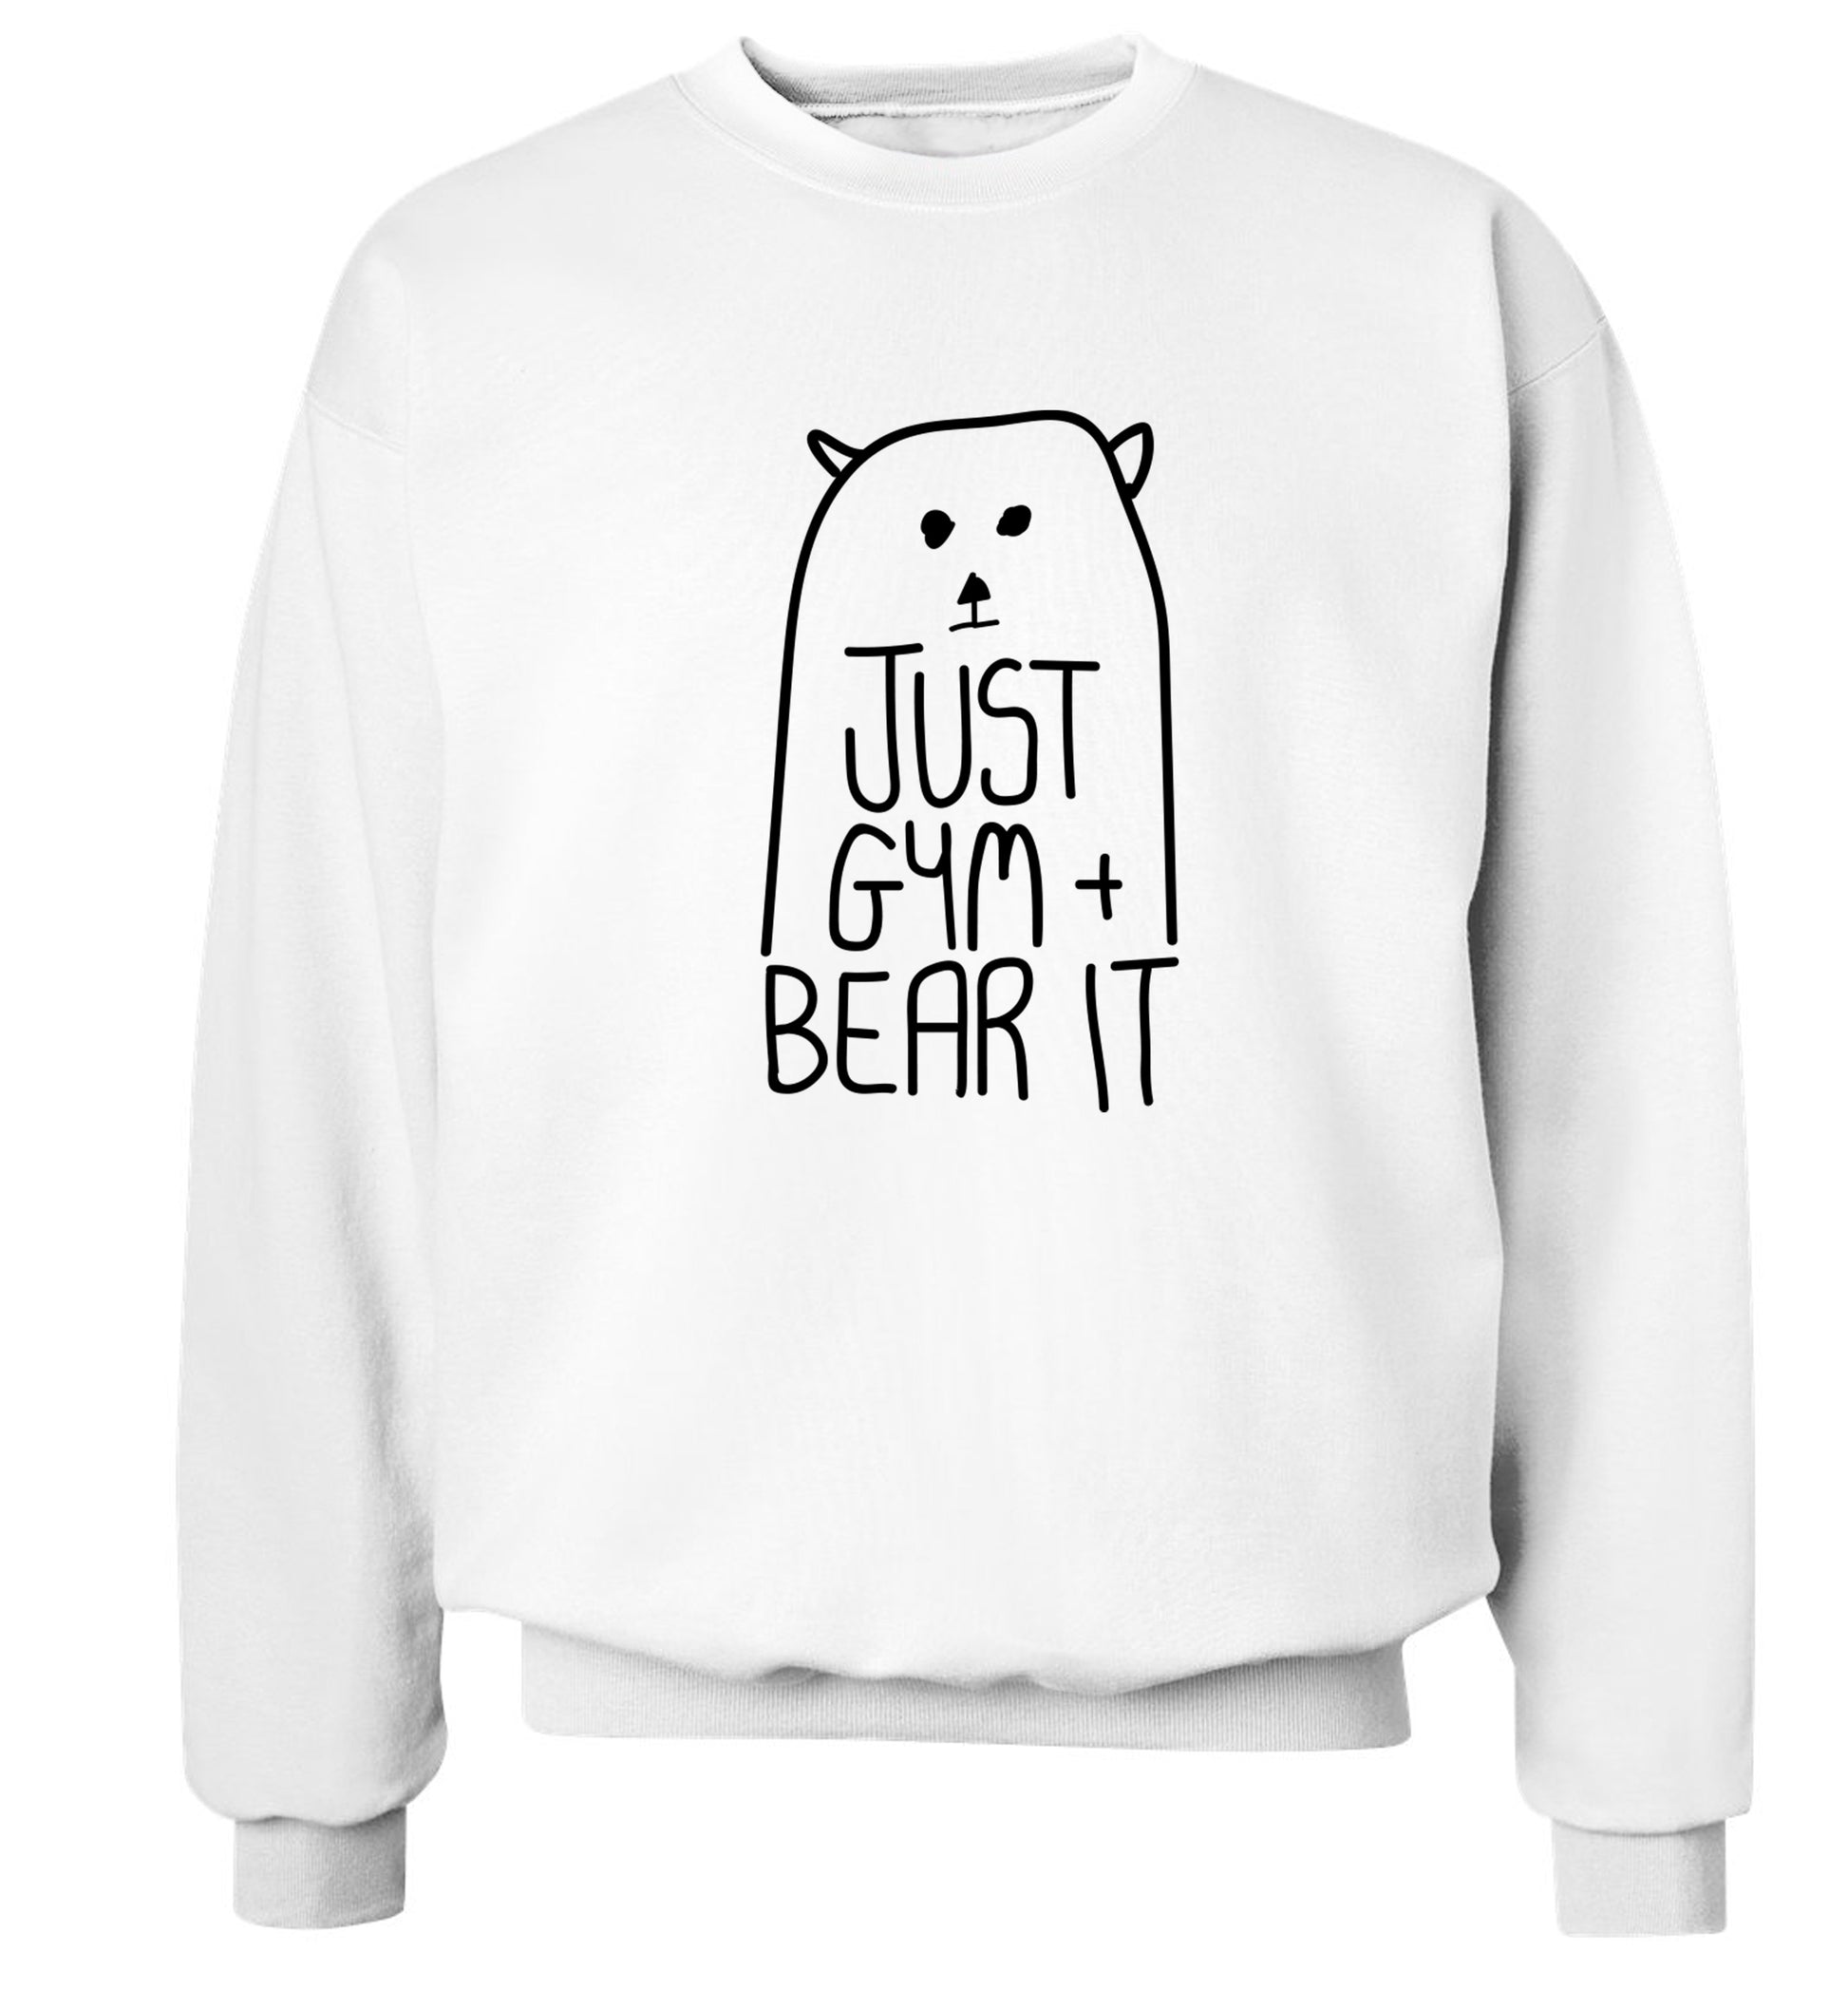 Just gym and bear it Adult's unisex white Sweater 2XL